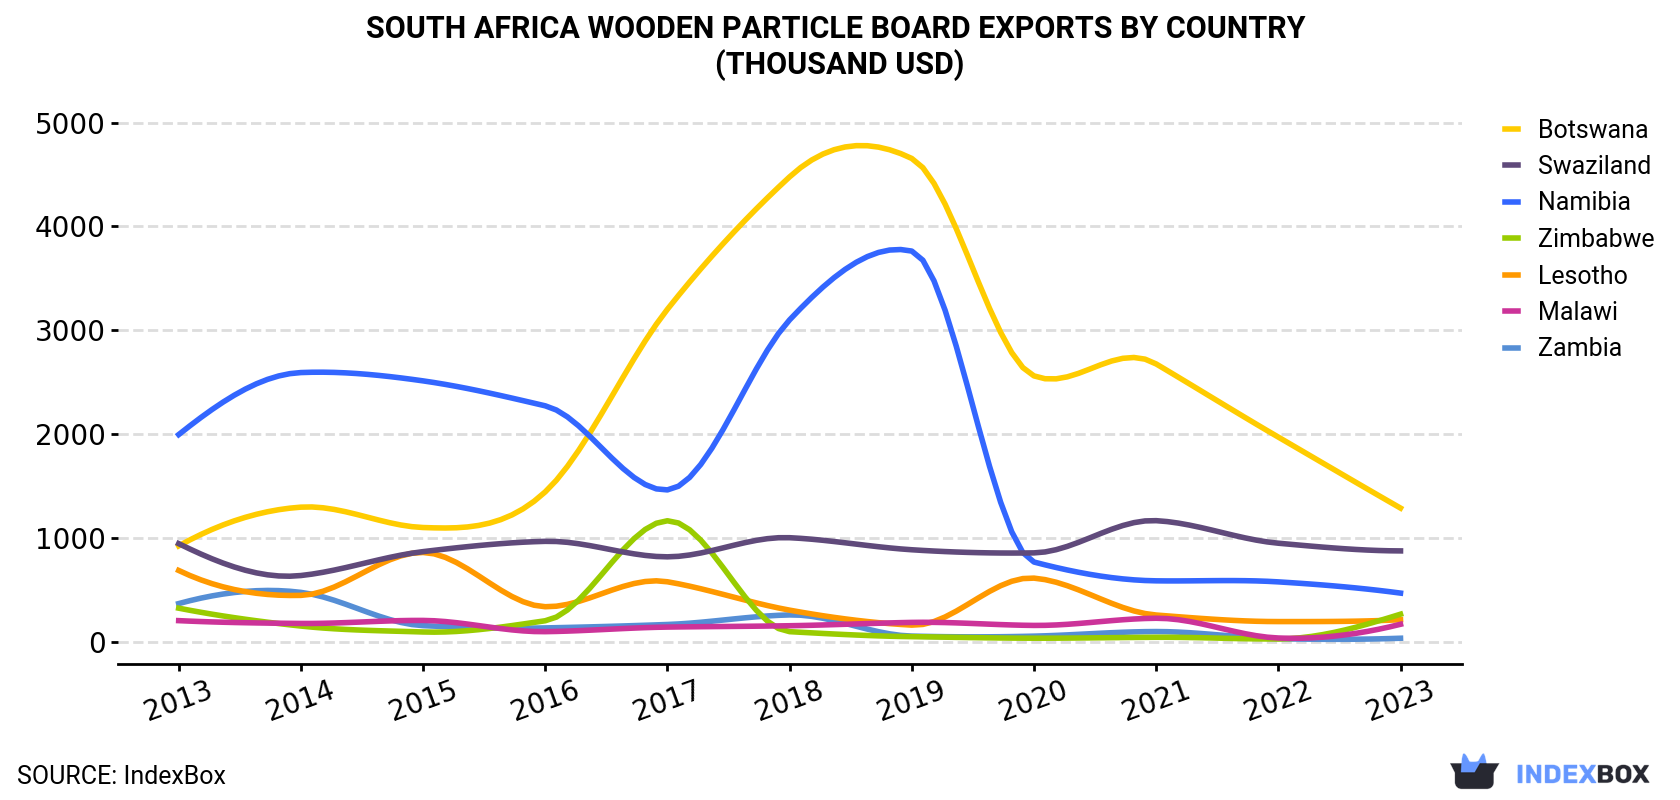 South Africa Wooden Particle Board Exports By Country (Thousand USD)